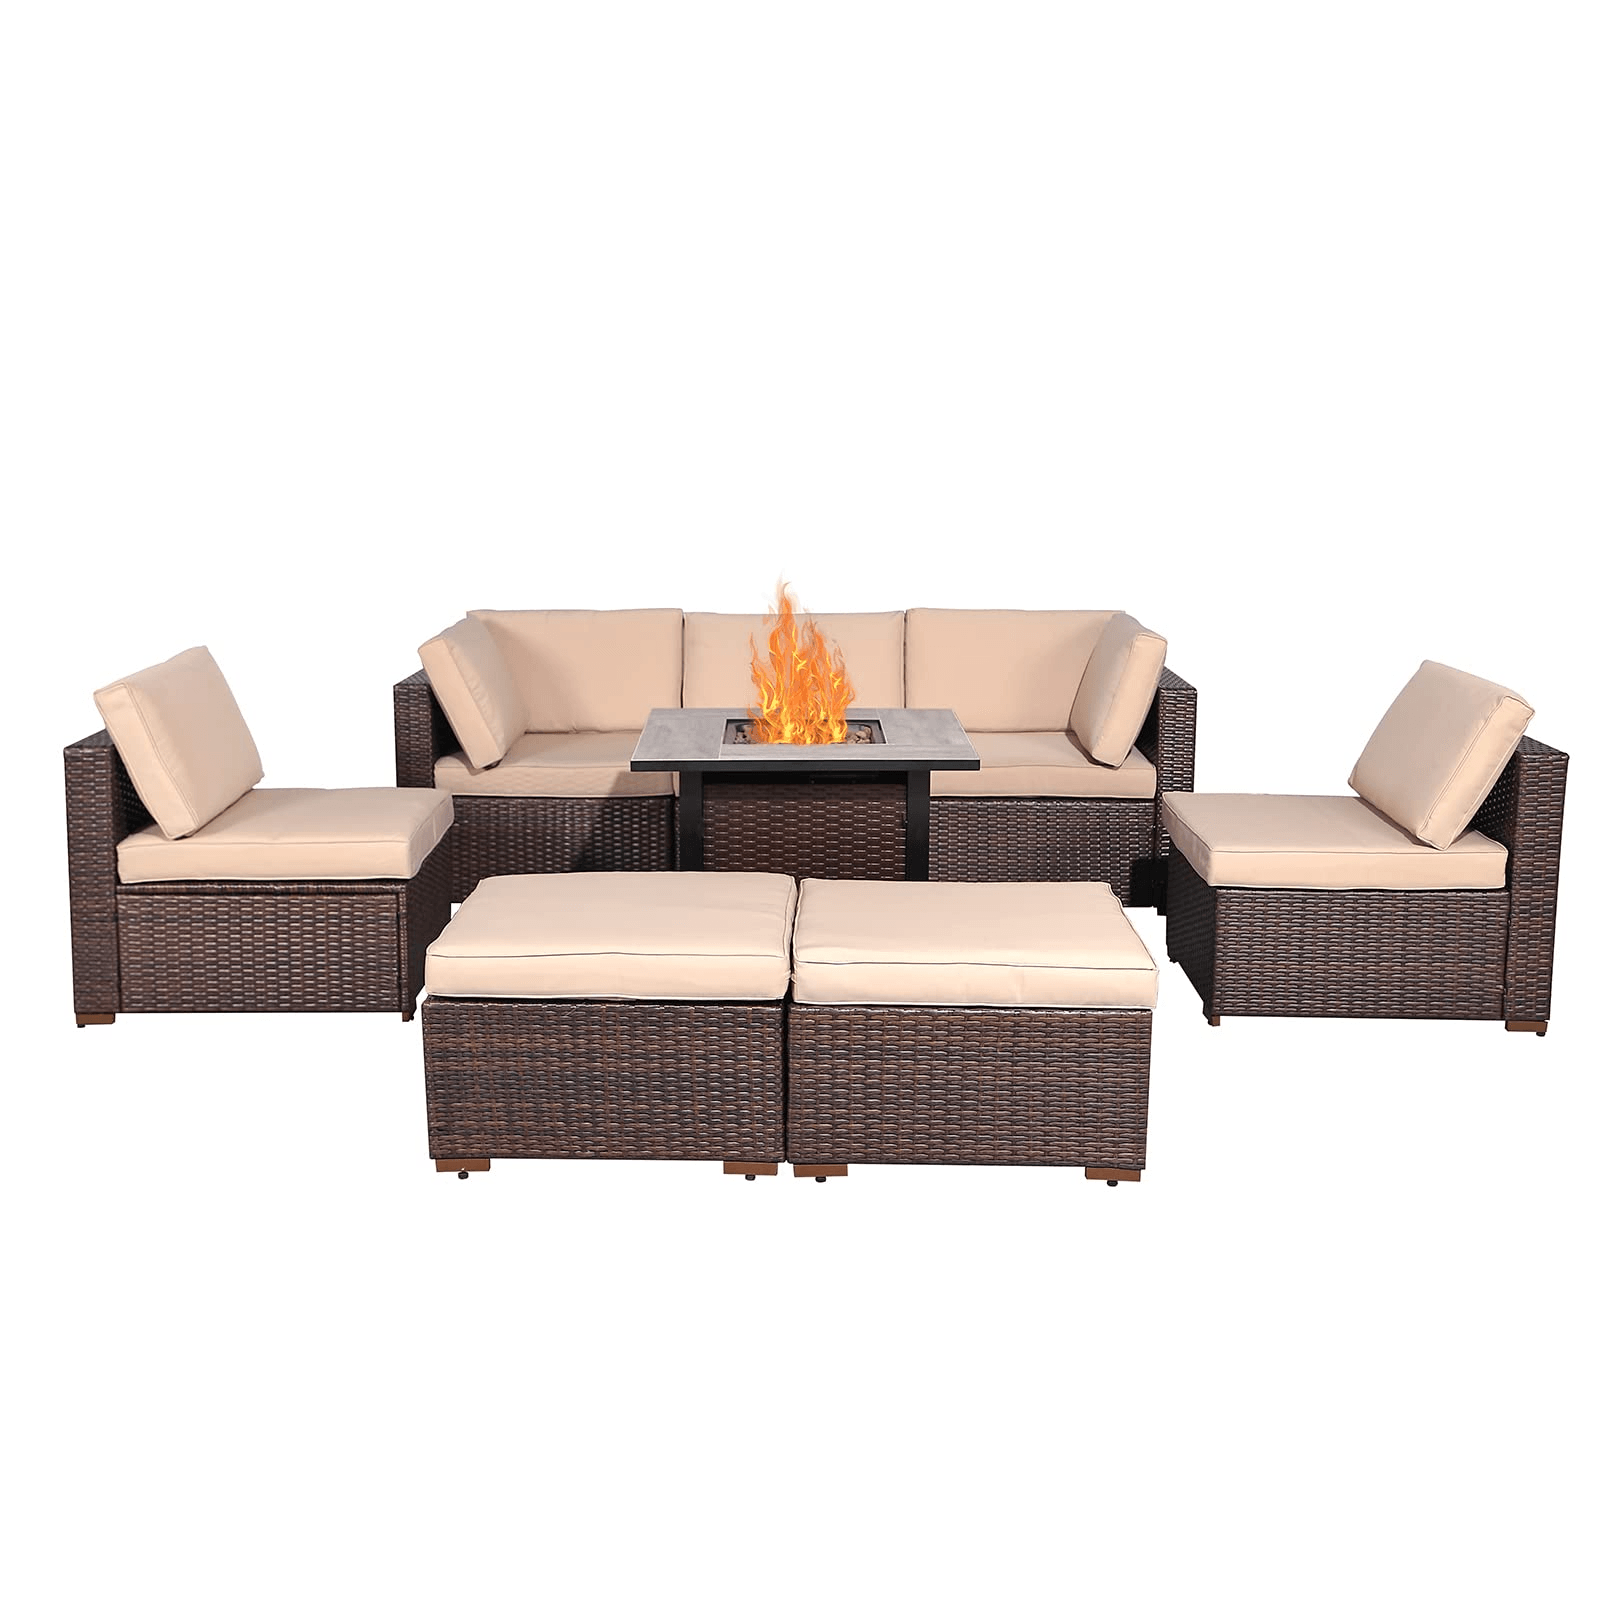 8-pc. Patio Furniture Set with Gas Fire Pit Table, and Ottomans, Wicker Design sale  